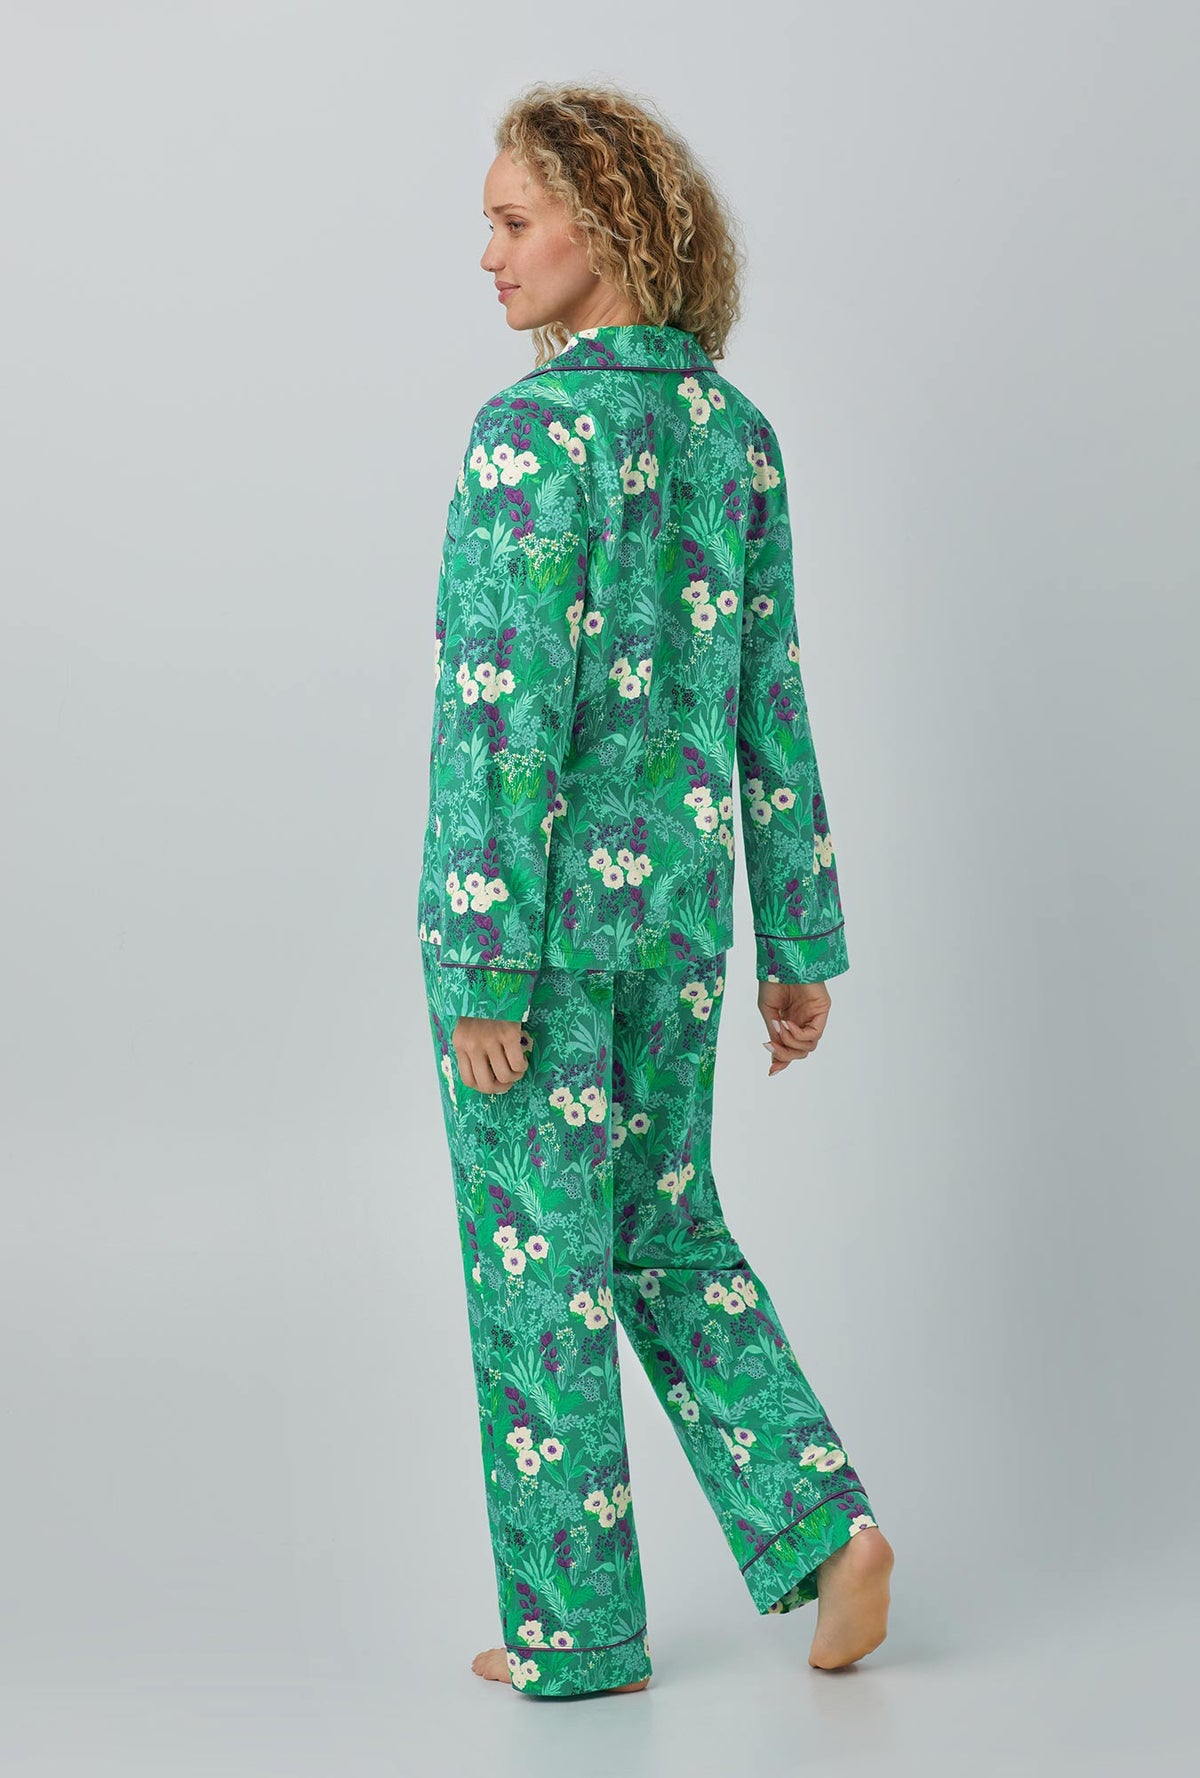 A lady wearing green  Long Sleeve Classic Stretch Jersey PJ Set with Wintergreens  print